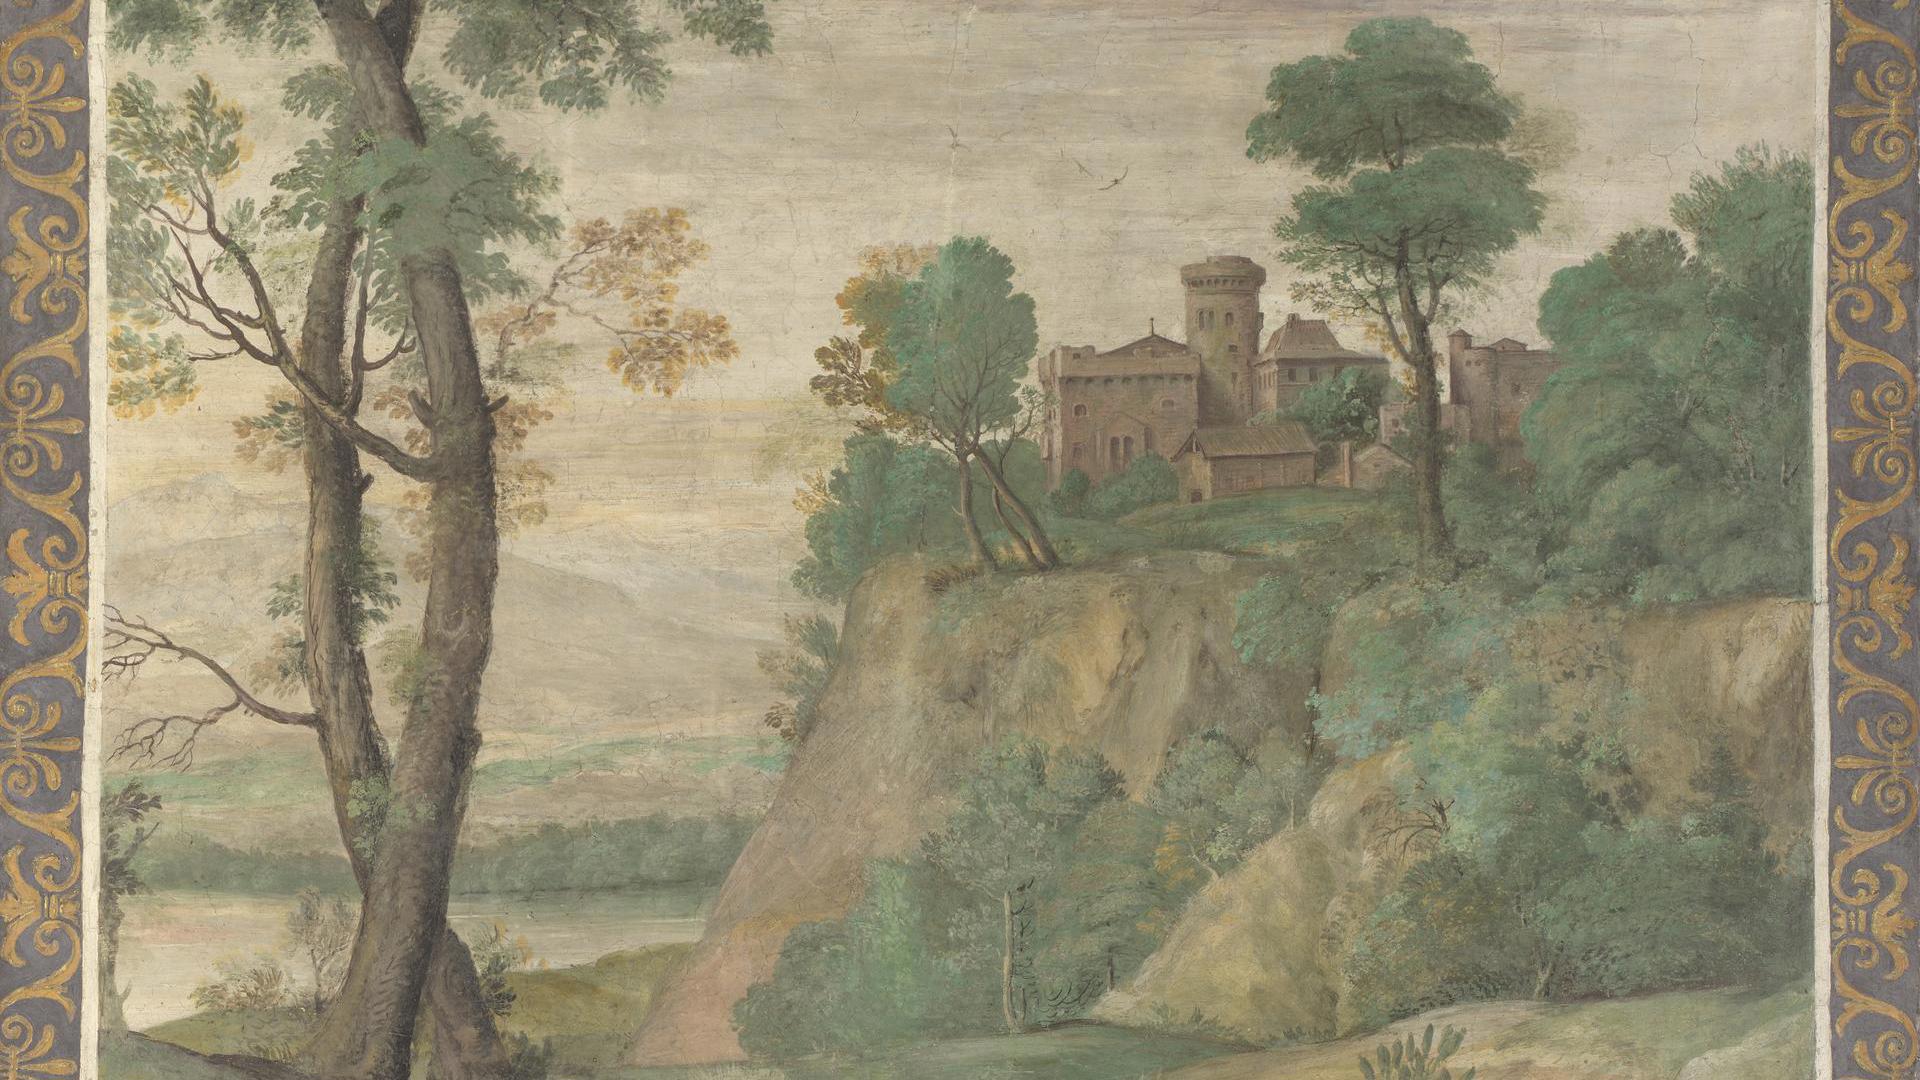 Apollo pursuing Daphne by Domenichino and assistants